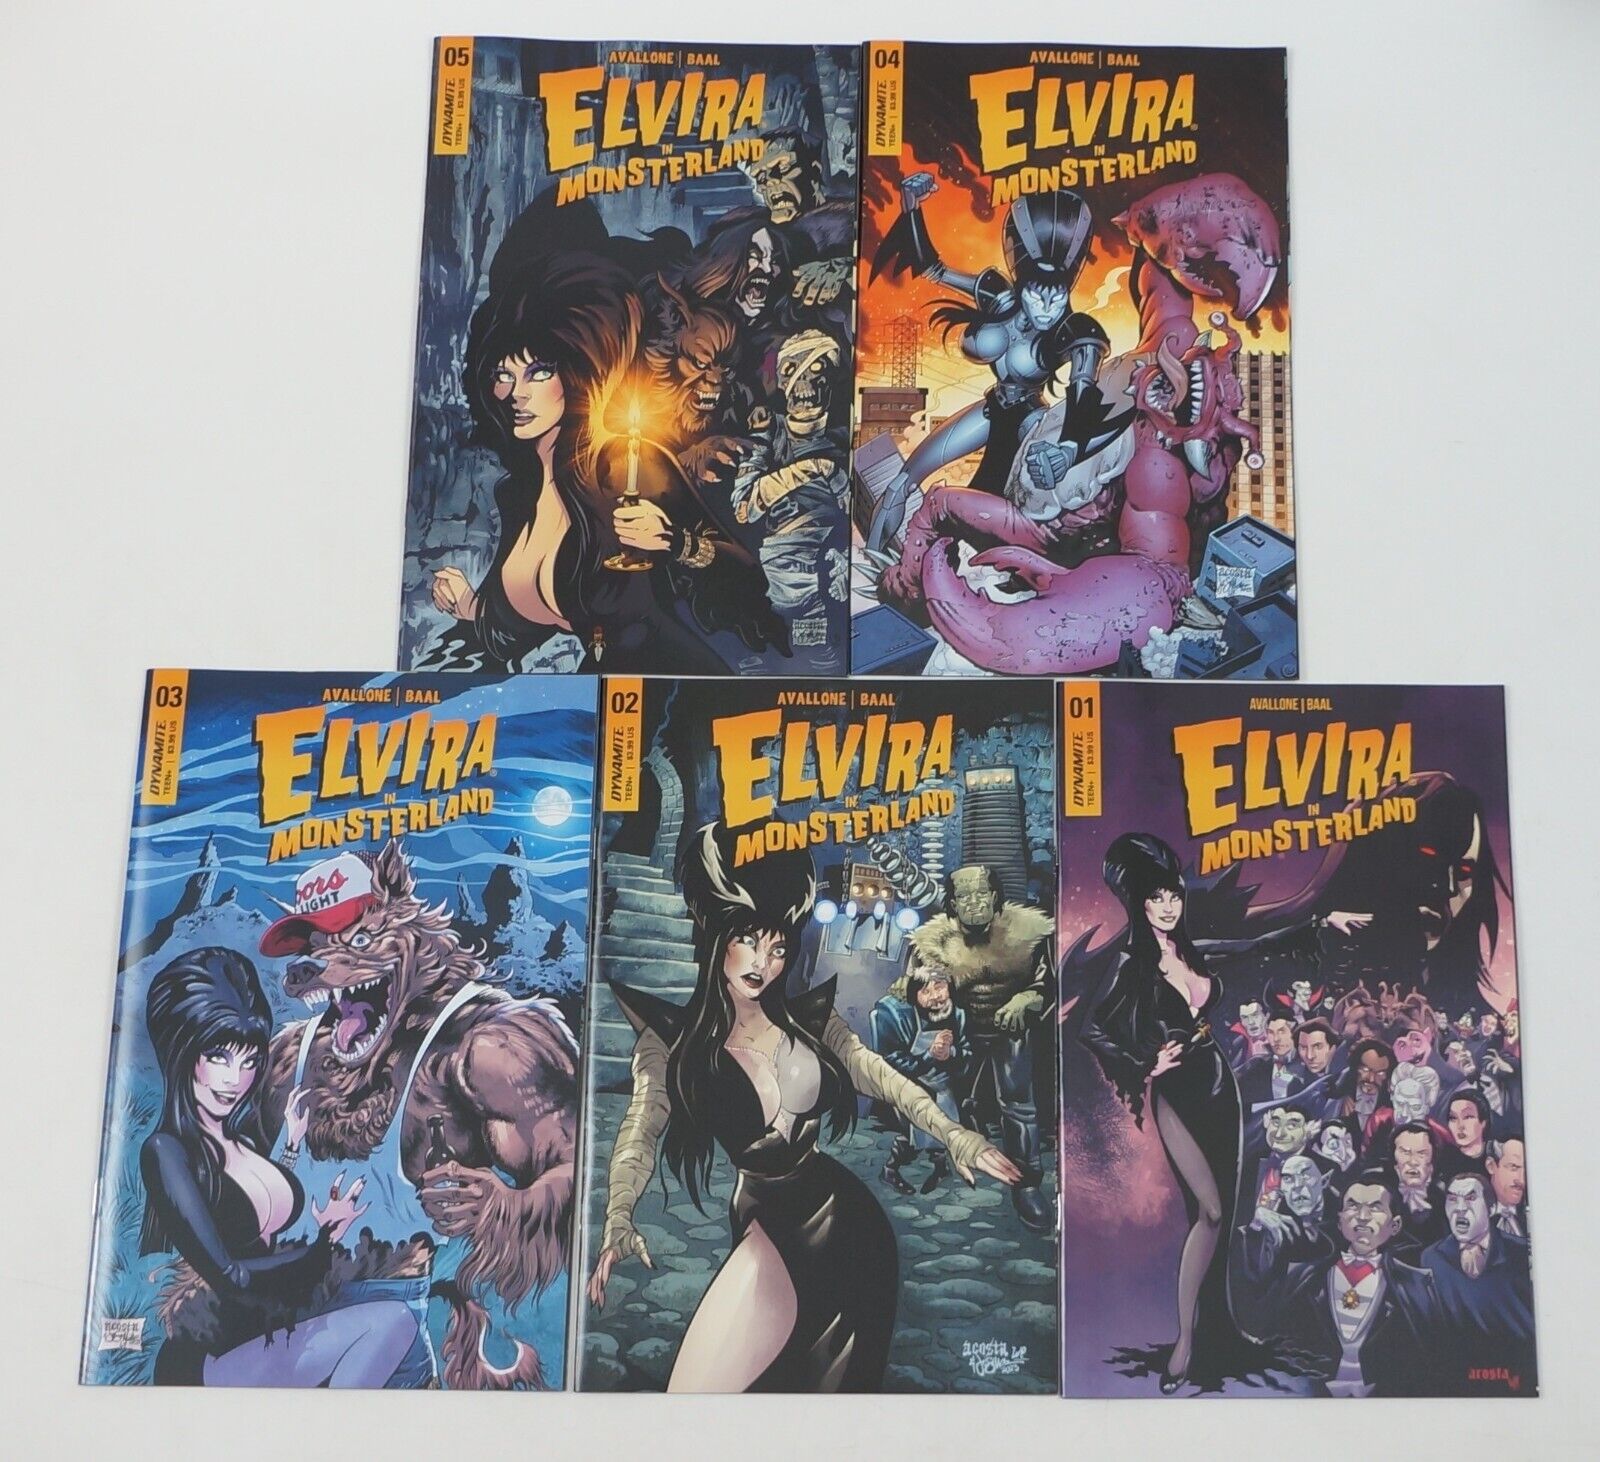 Elvira in Monsterland #1-5 VF/NM complete series Dave Acosta - all A variants